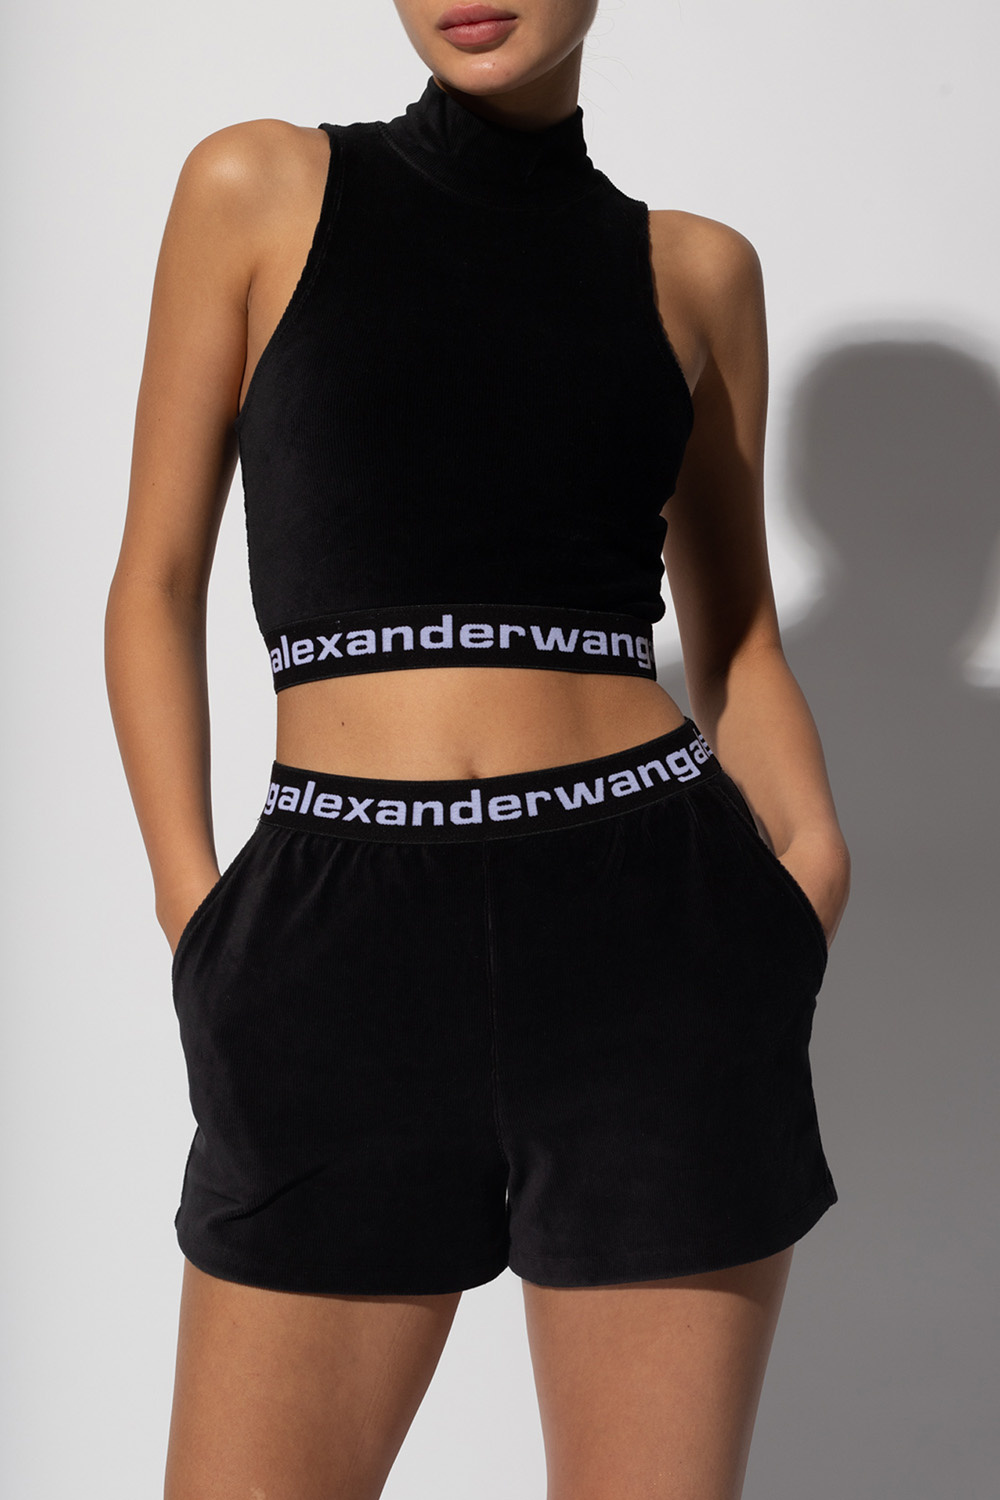 A STEP AHEAD IN STYLISH SHOES T by Alexander Wang